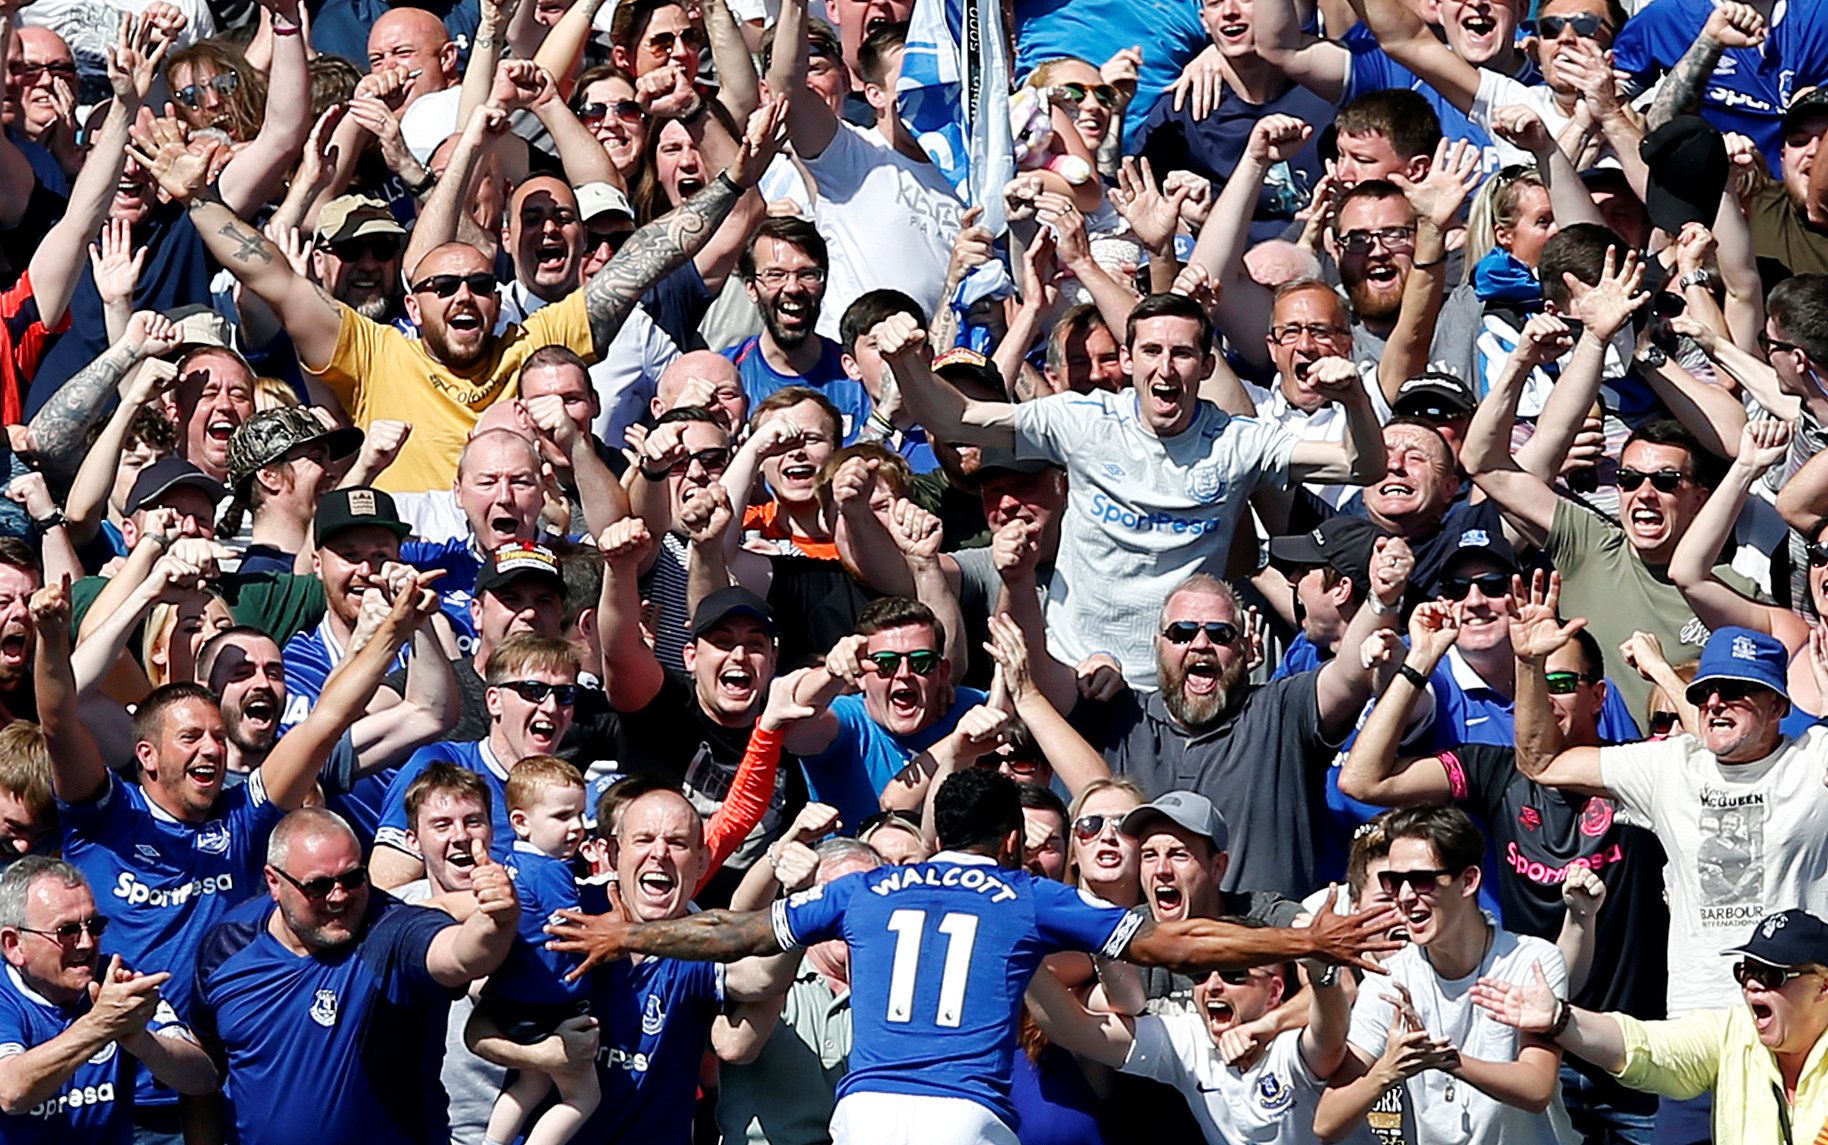 Soccer Football - Premier League - Everton v Manchester United - Goodison Park, Liverpool, Britain - April 21, 2019  Everton's Theo Walcott celebrates scoring their fourth goal with fans                      REUTERS/Andrew Yates  EDITORIAL USE ONLY. No use with unauthorized audio, video, data, fixture lists, club/league logos or 